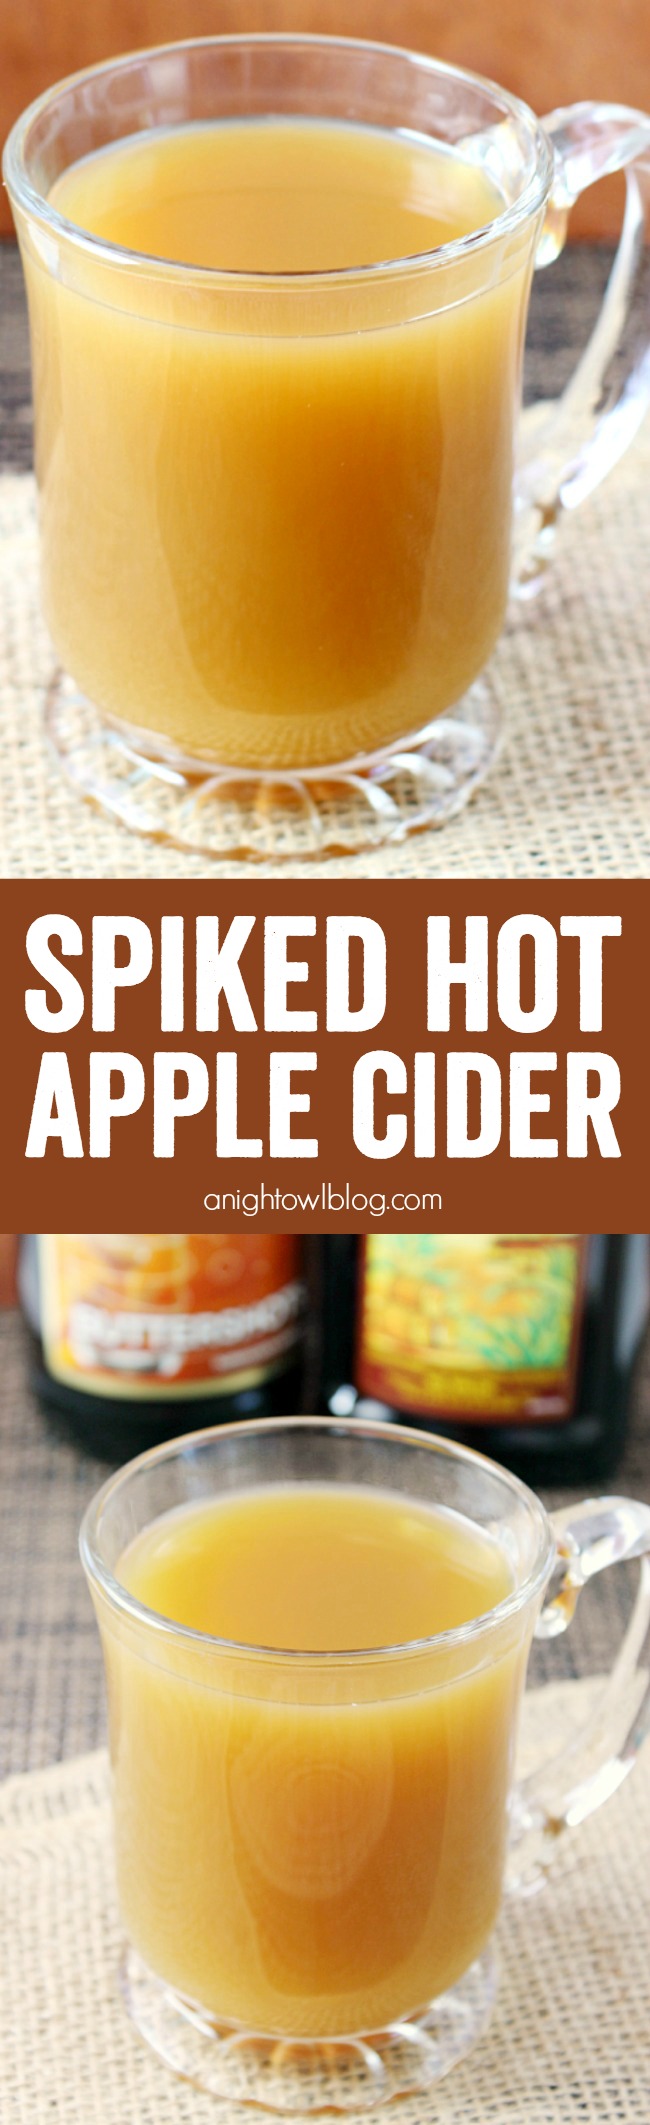 This Spiked Hot Apple Cider is the perfect (adult-only) way to warm up on these cooler fall evenings! You'll wish it could be fall all year long!